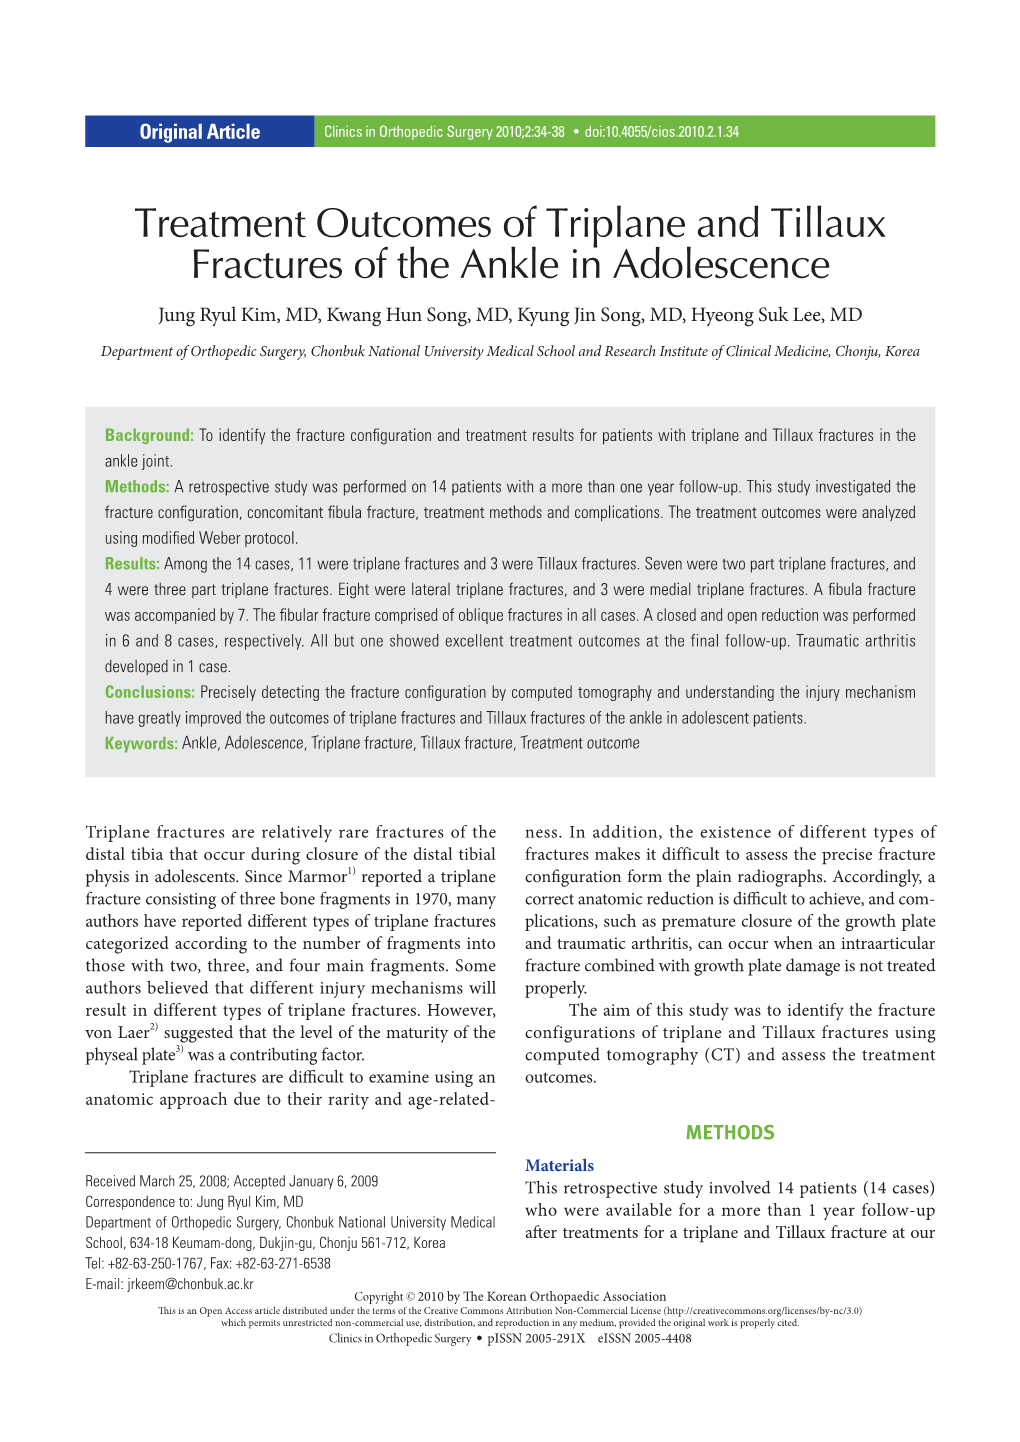 Treatment Outcomes of Triplane and Tillaux Fractures of the Ankle in Adolescence Jung Ryul Kim, MD, Kwang Hun Song, MD, Kyung Jin Song, MD, Hyeong Suk Lee, MD